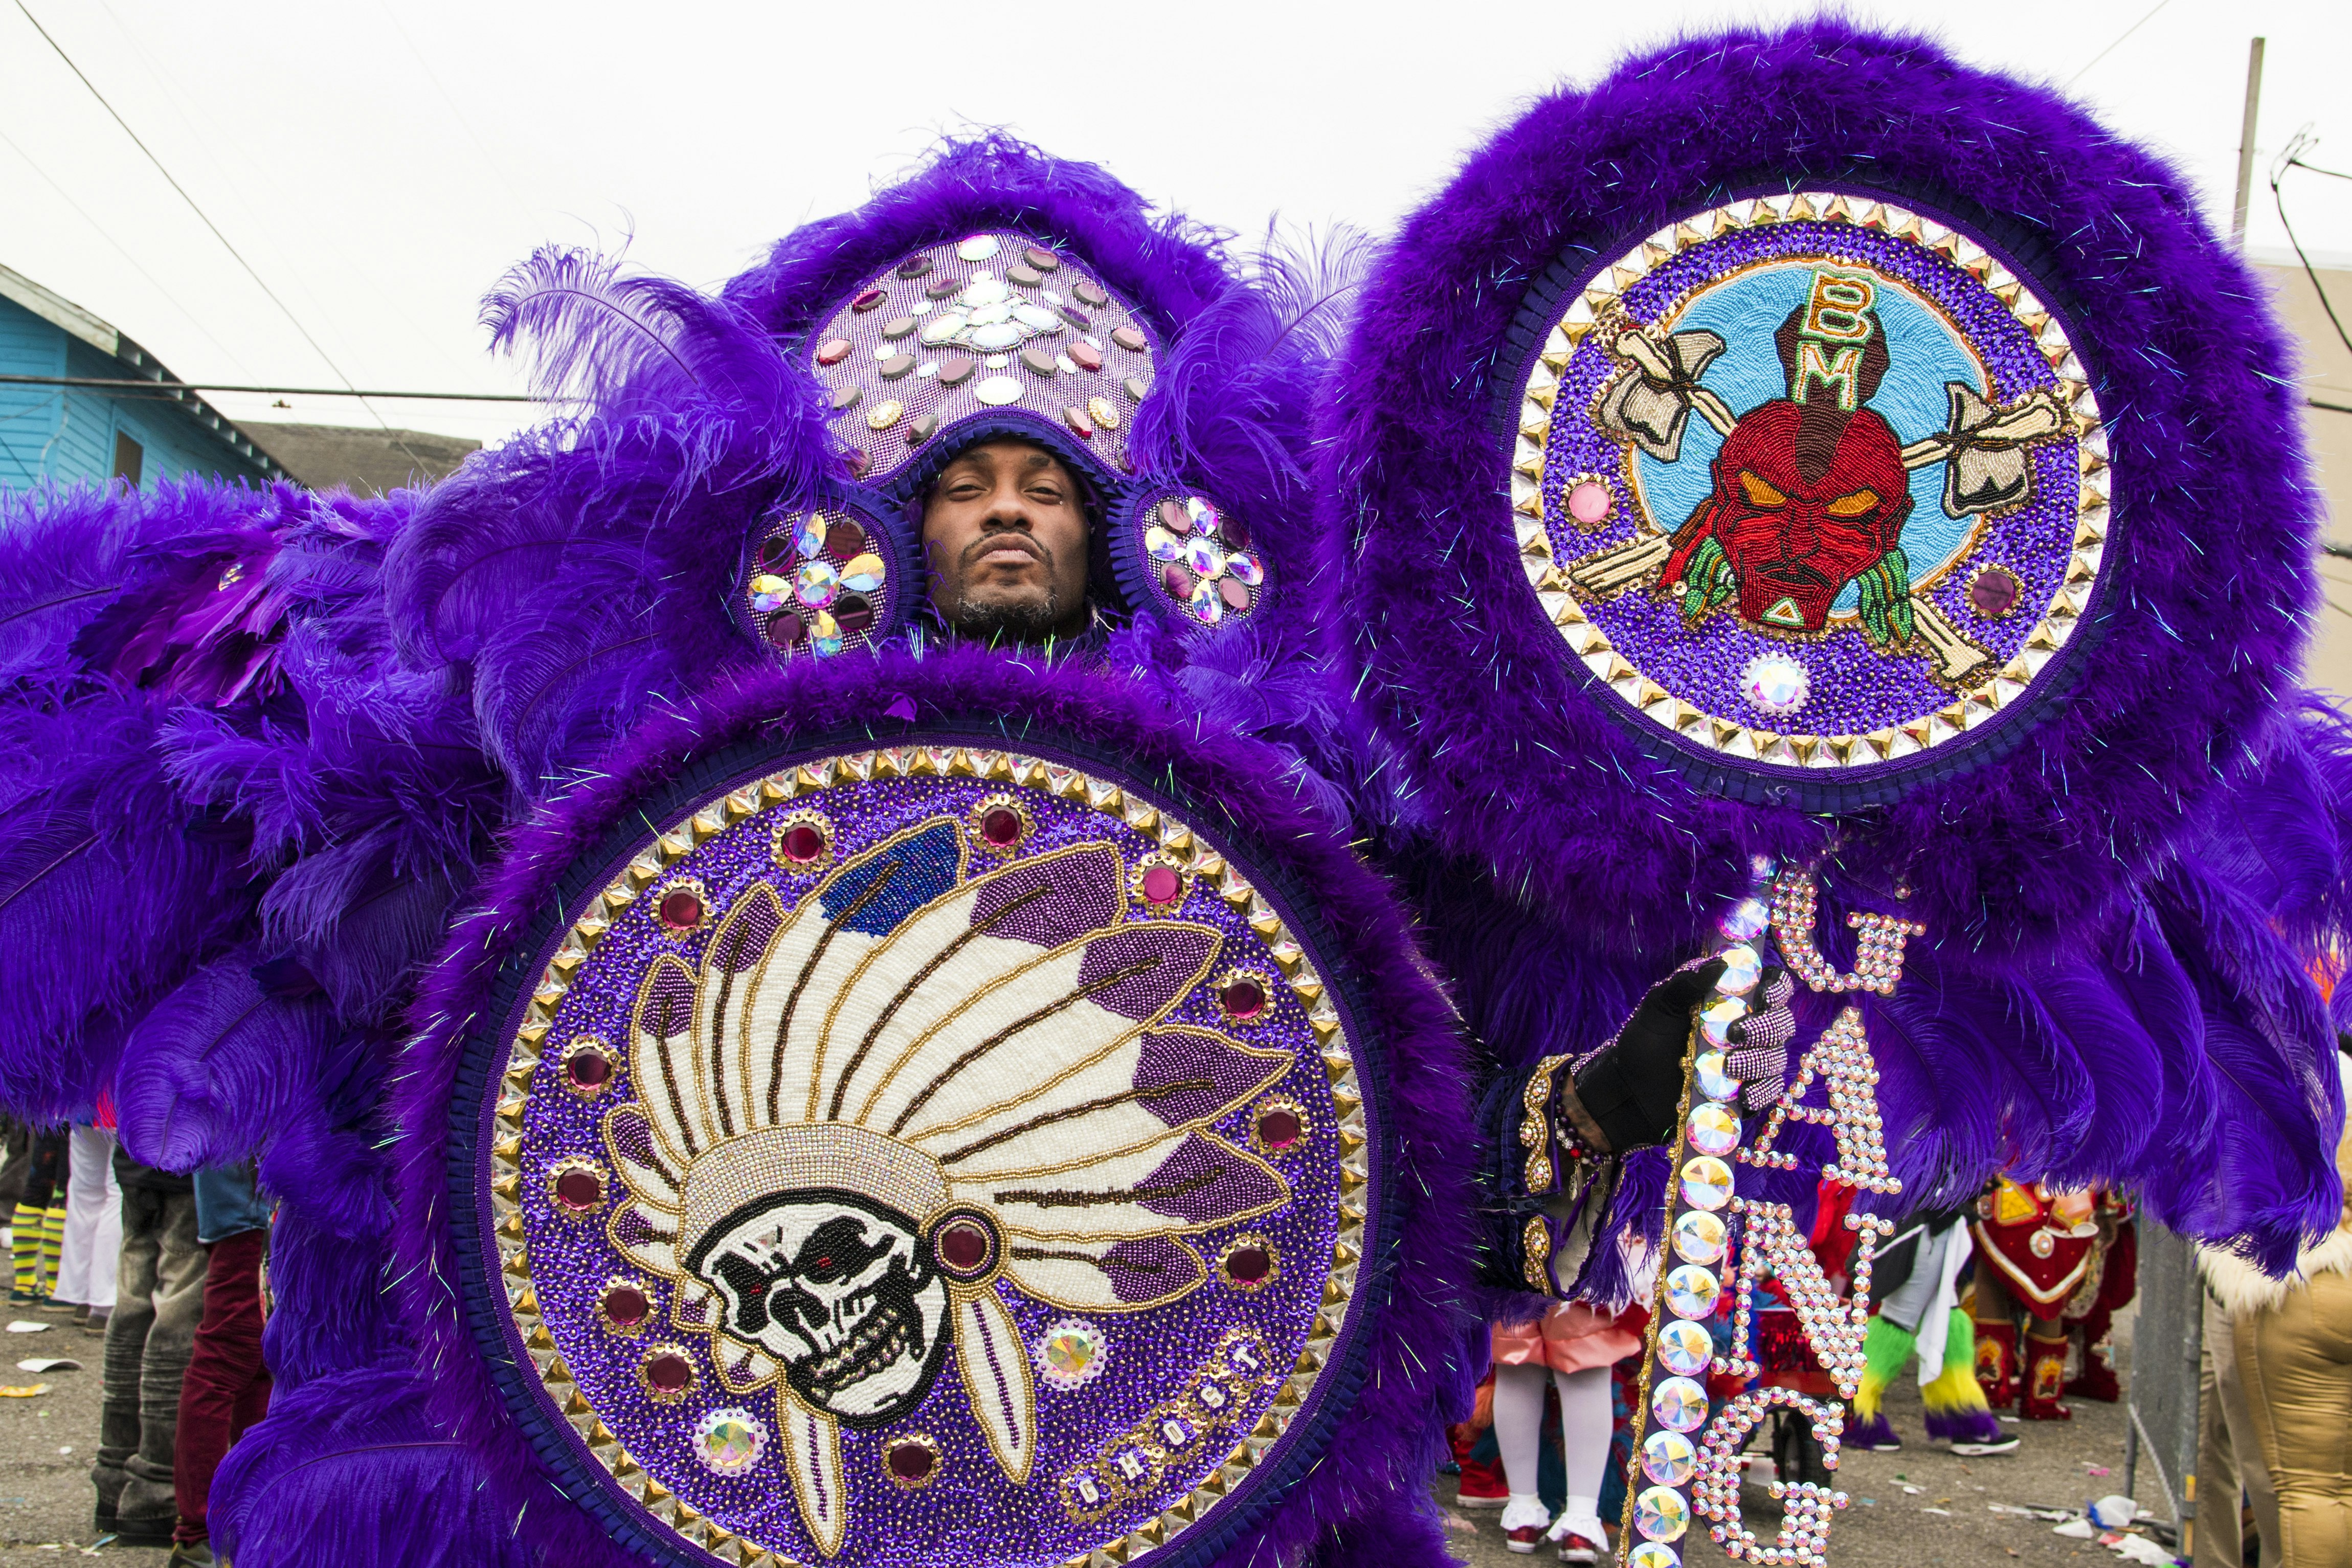 A man wearing a large, elaborate, feather Mardi Gras Indian costume. He's holding an equally elaborate walking stick